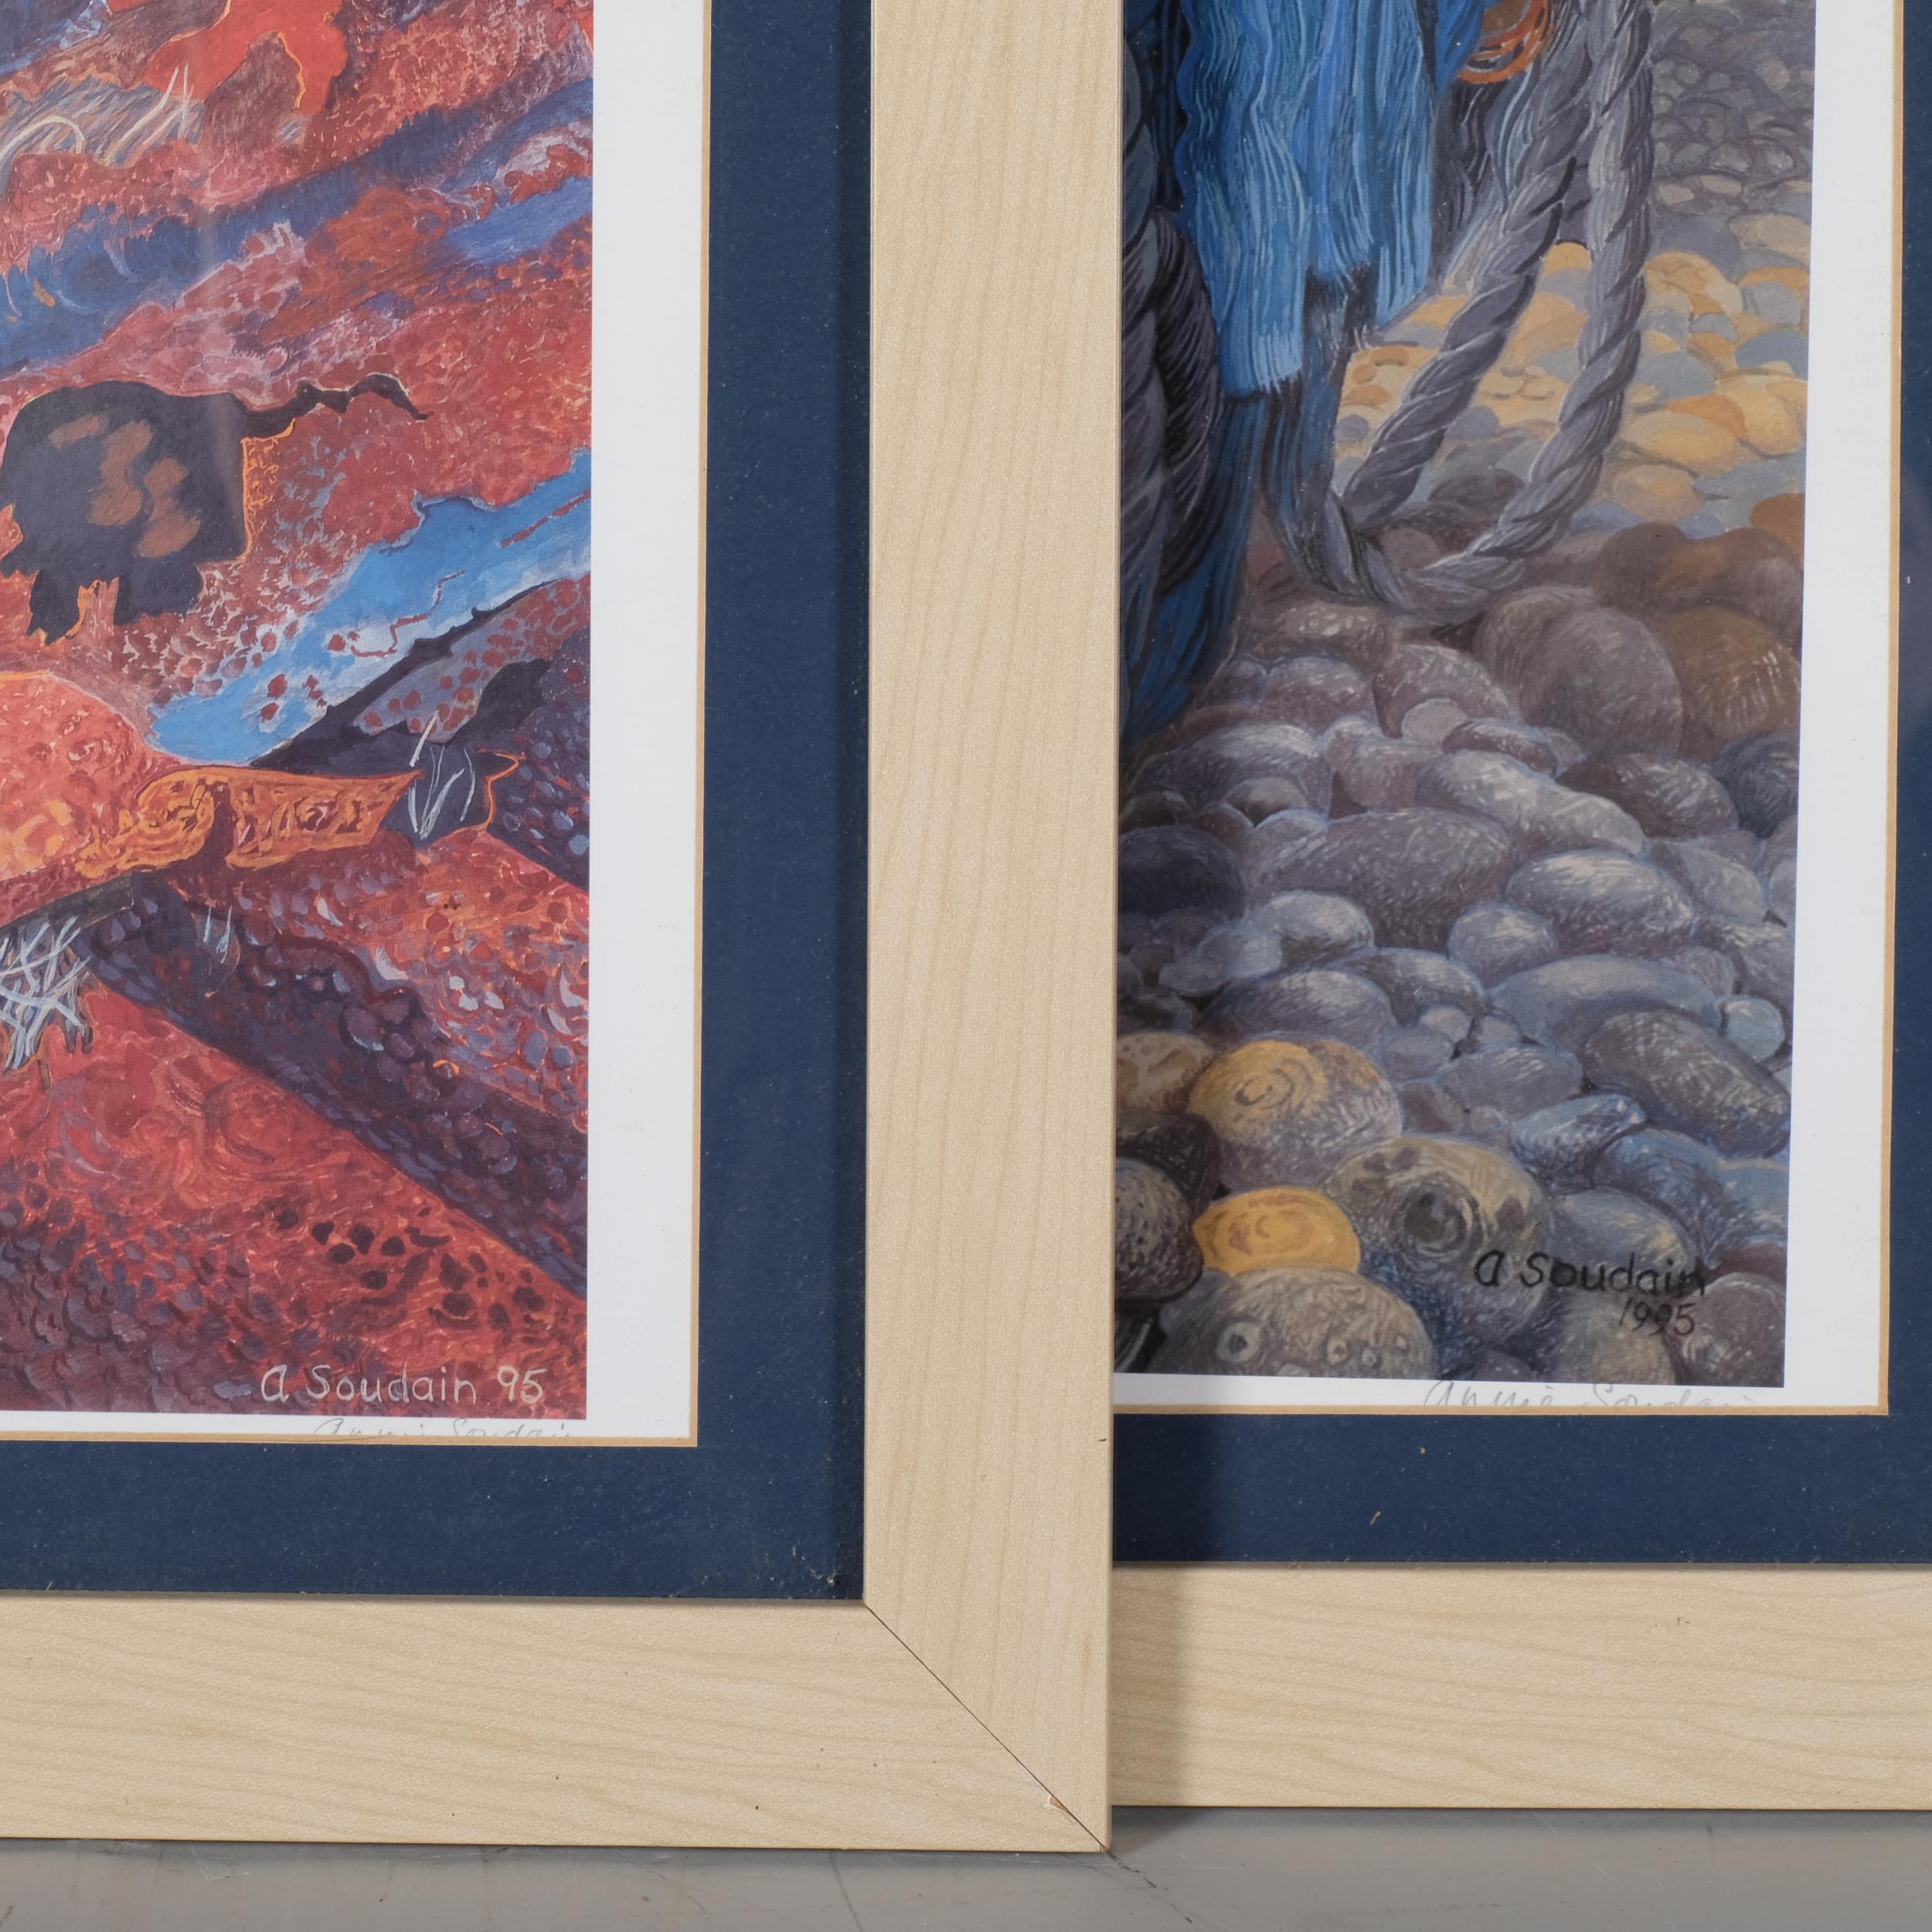 Annie Soudain, pair of beach scenes, colour lithographs, signed in pencil, image 52cm x 36cm, framed - Image 3 of 4